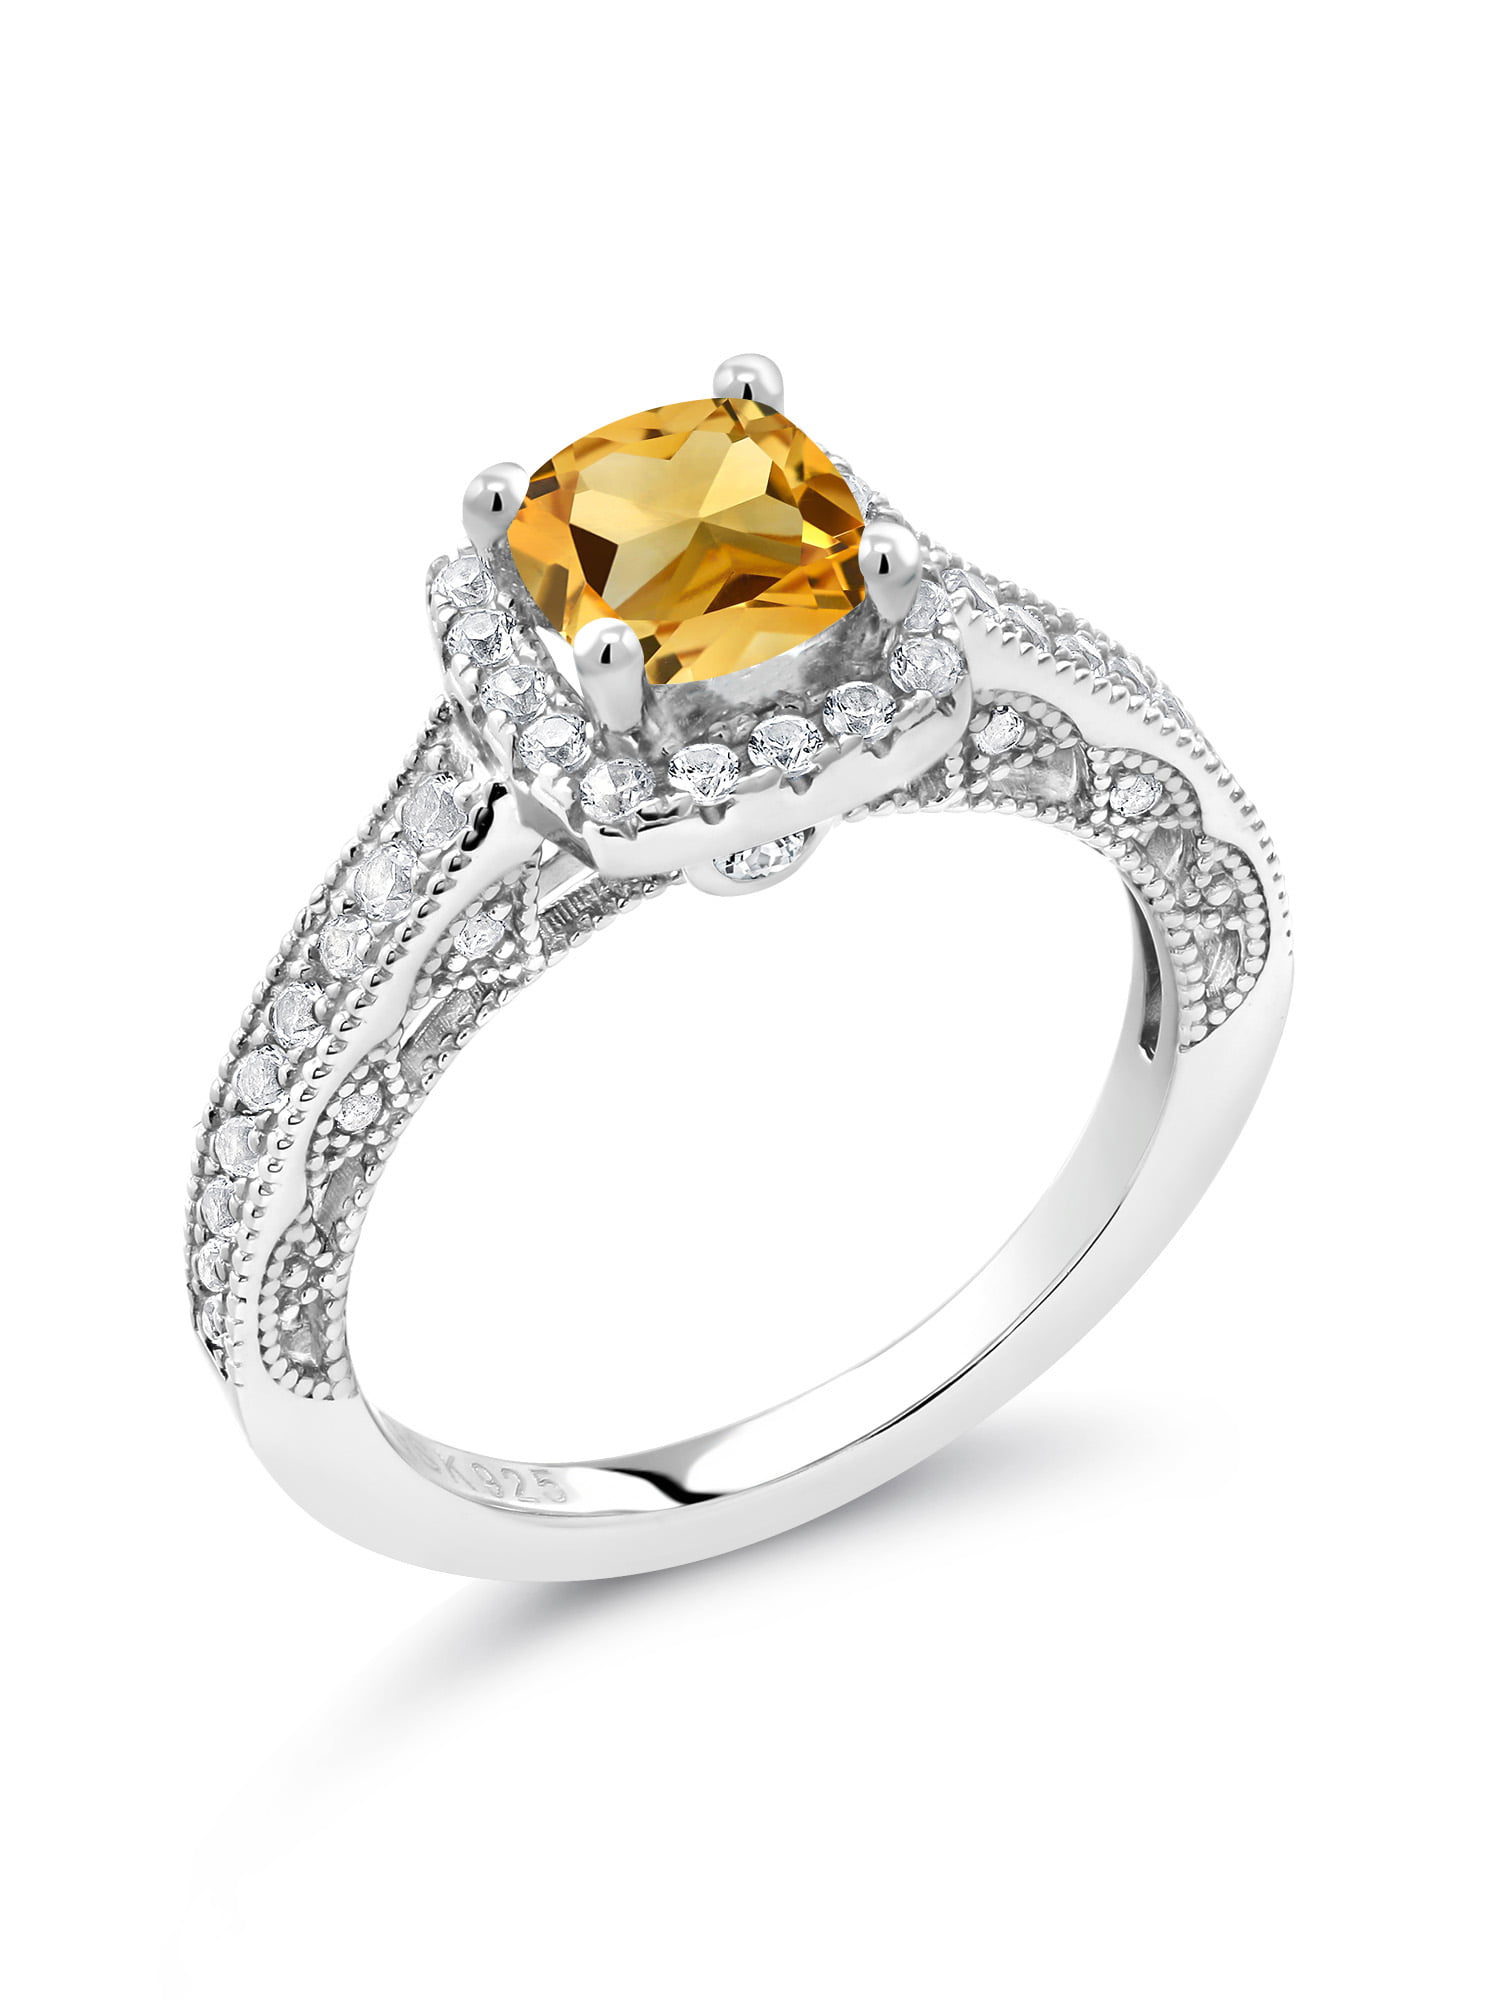 1 Ct Yellow Citrine Round Ring .925 Sterling Silver 